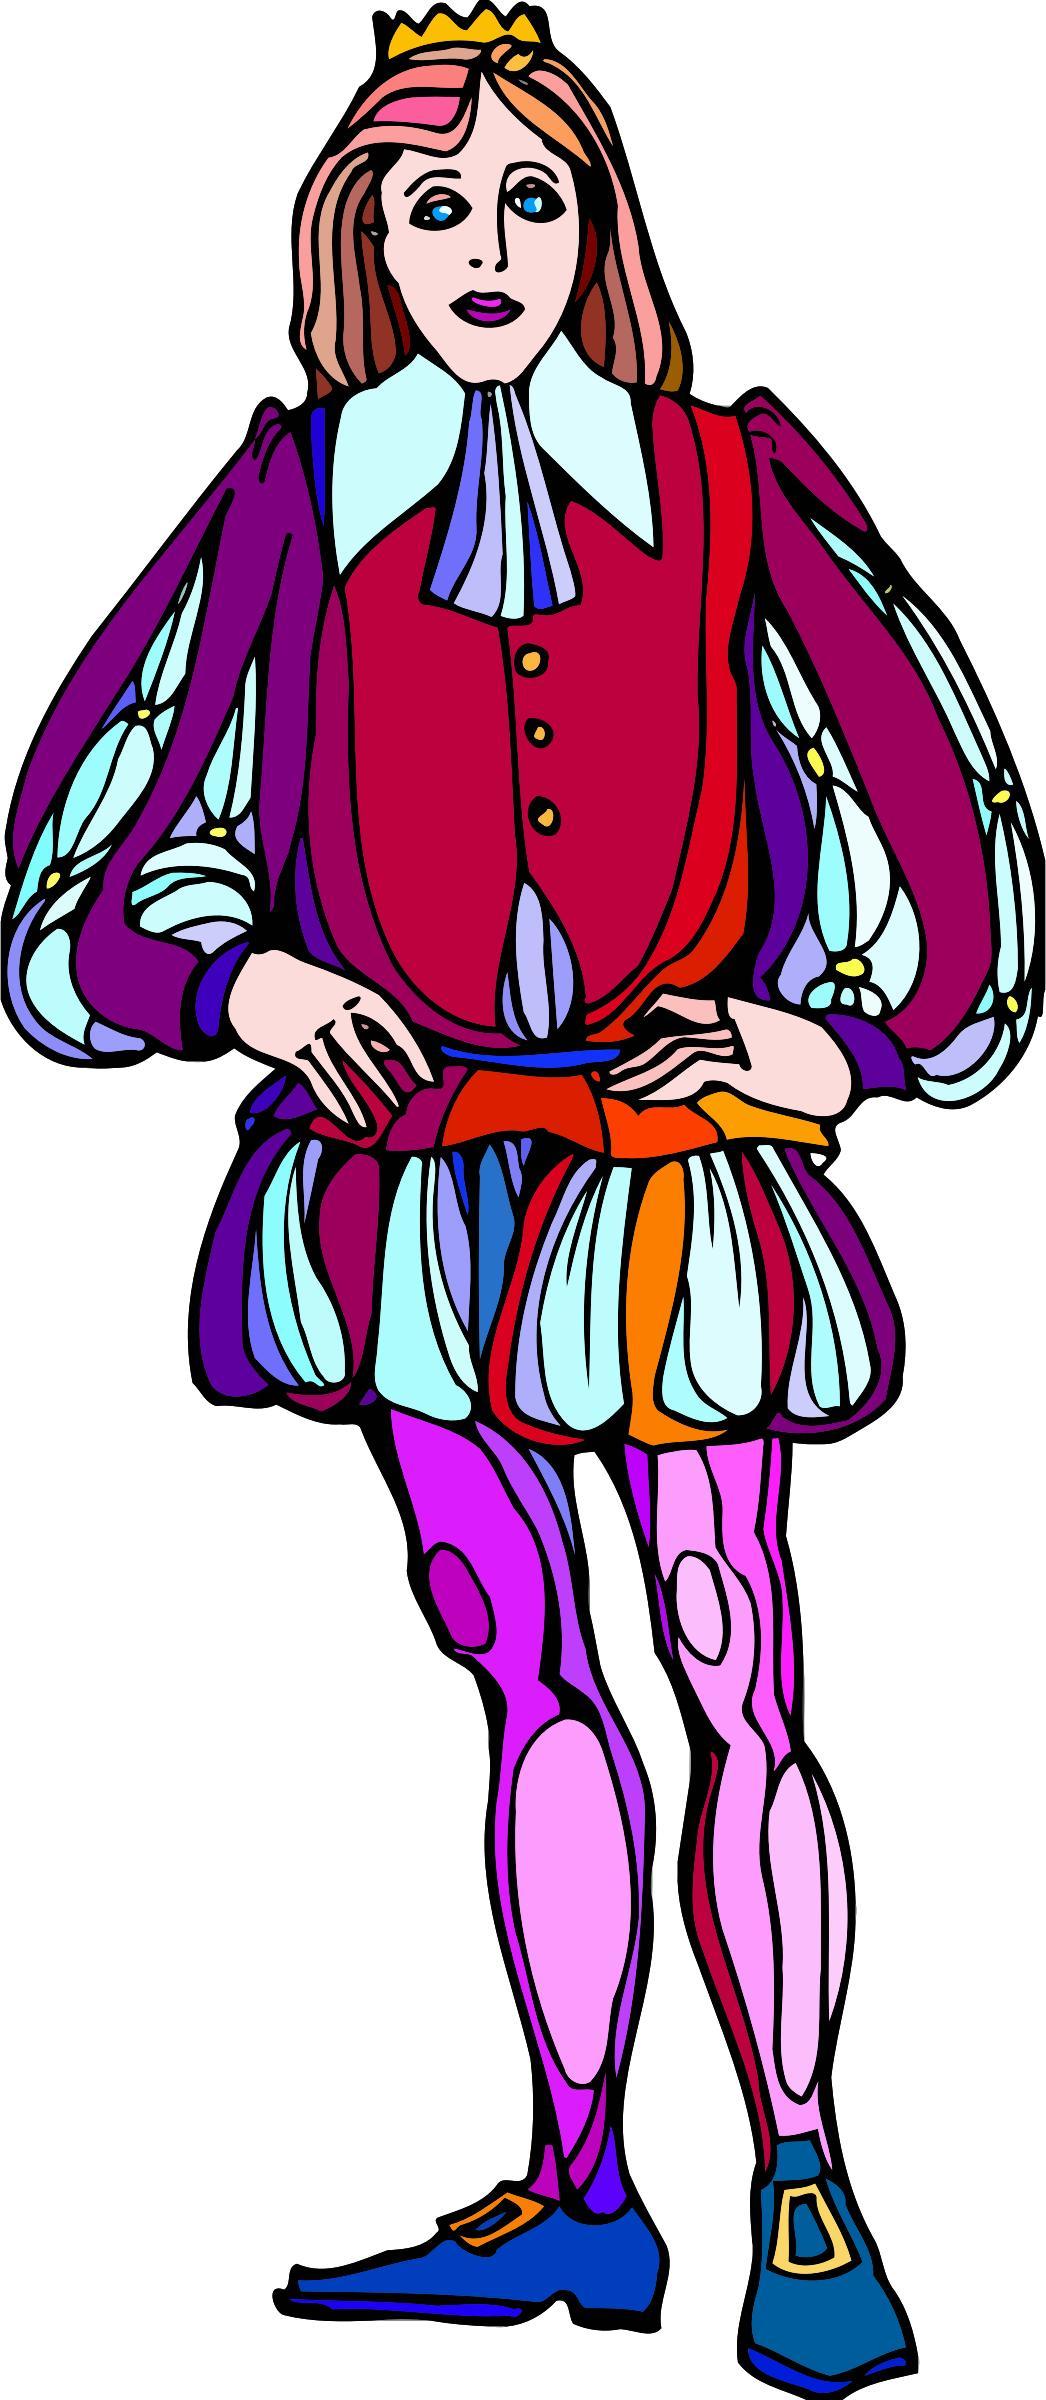 Shakespeare characters - prince (colour) png transparent